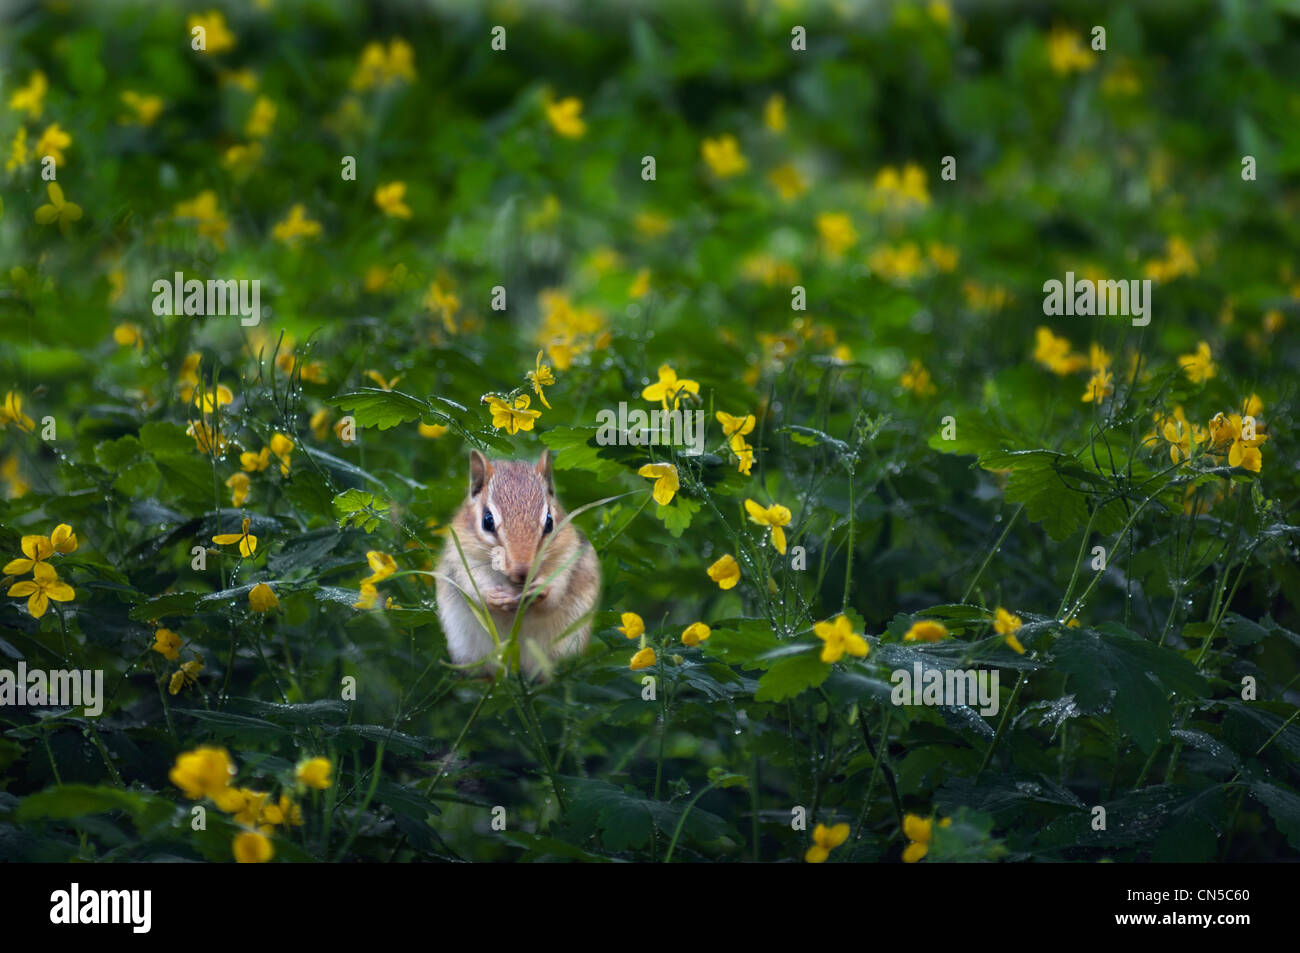 a chipmunk in a field of yellow wildflowers Stock Photo